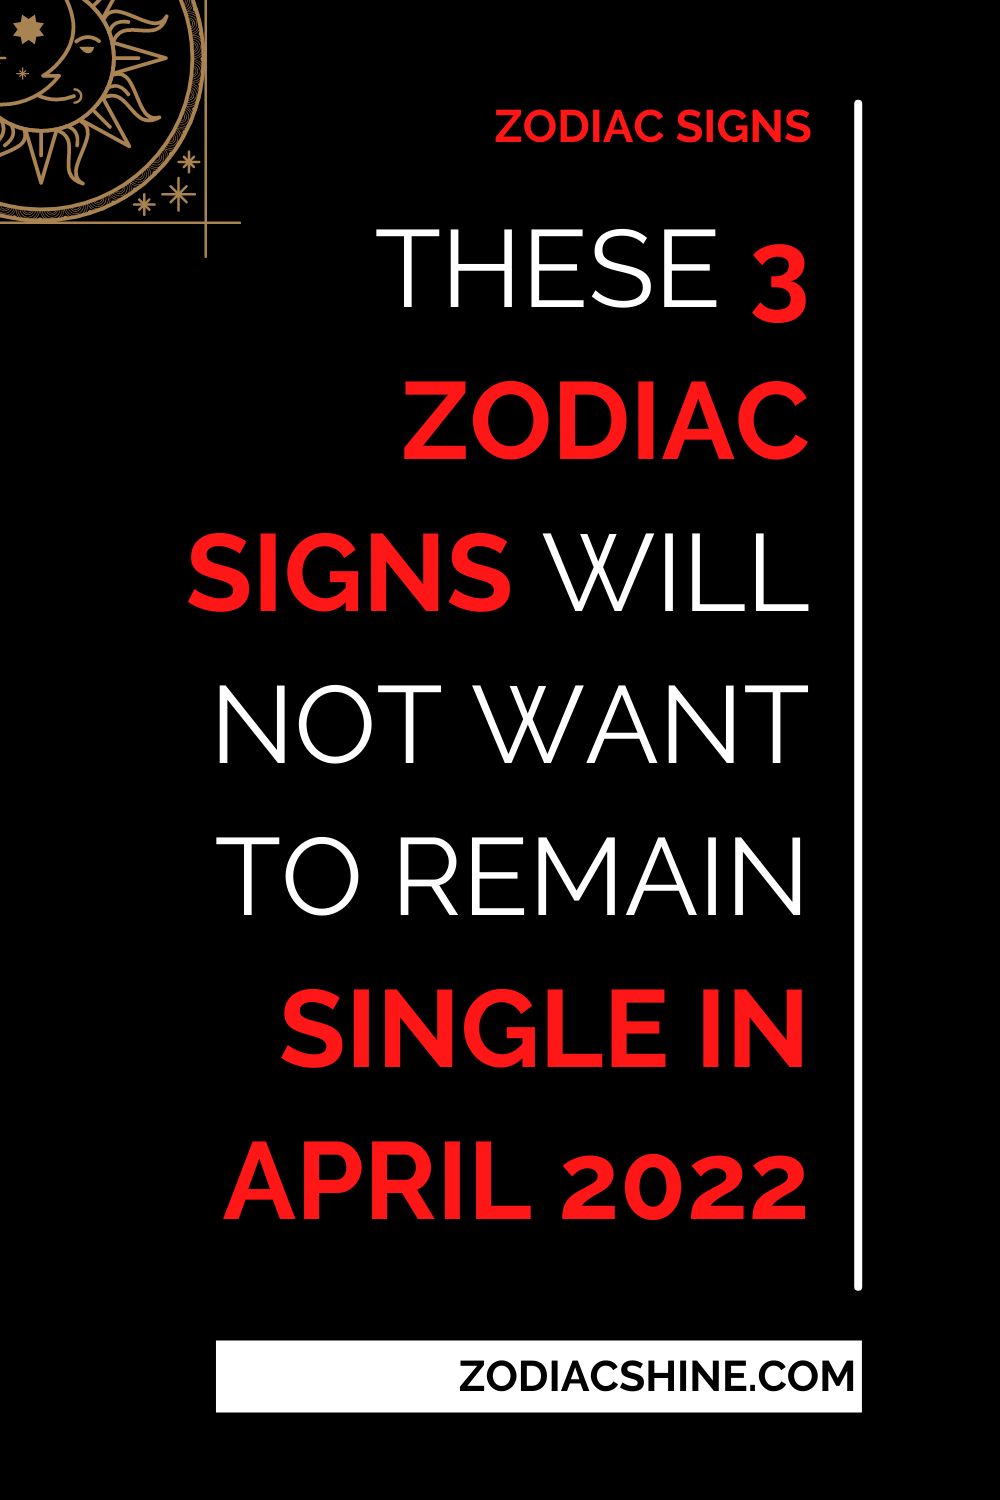 These 3 Zodiac Signs Will Not Want To Remain Single In April 2022